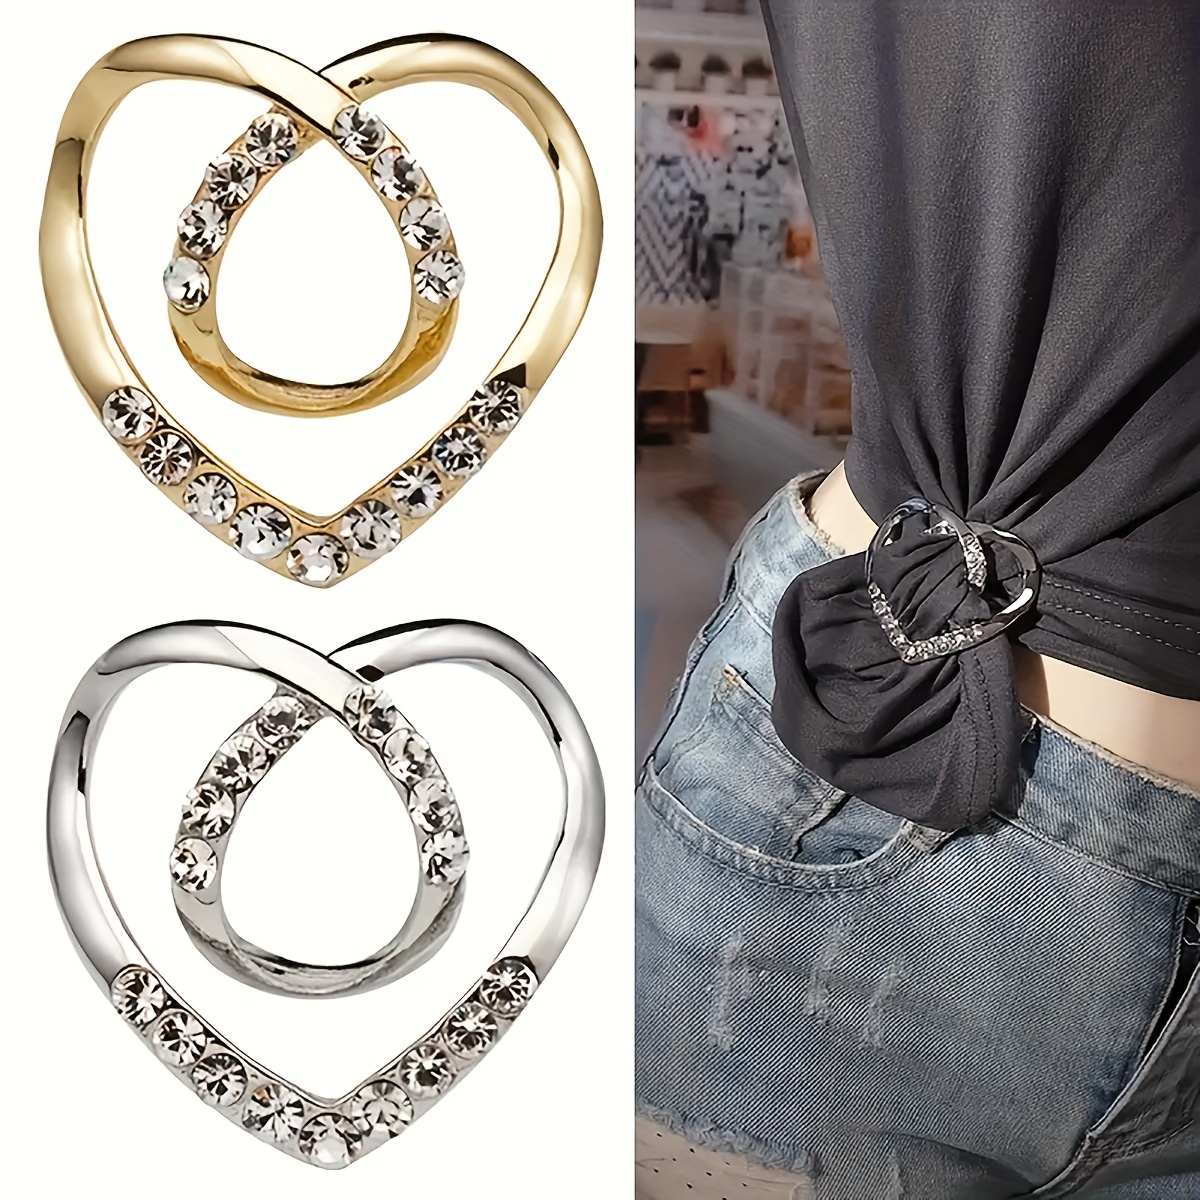 

2pcs Heart-shaped Metal Buckle Set, 1.46-inch Fashion Waist Cinch Clip, Multi-functional Scarf Ring, Decorative Shirt/dress Corner Knot Fastener, Stylish Clothing Accessory For Women